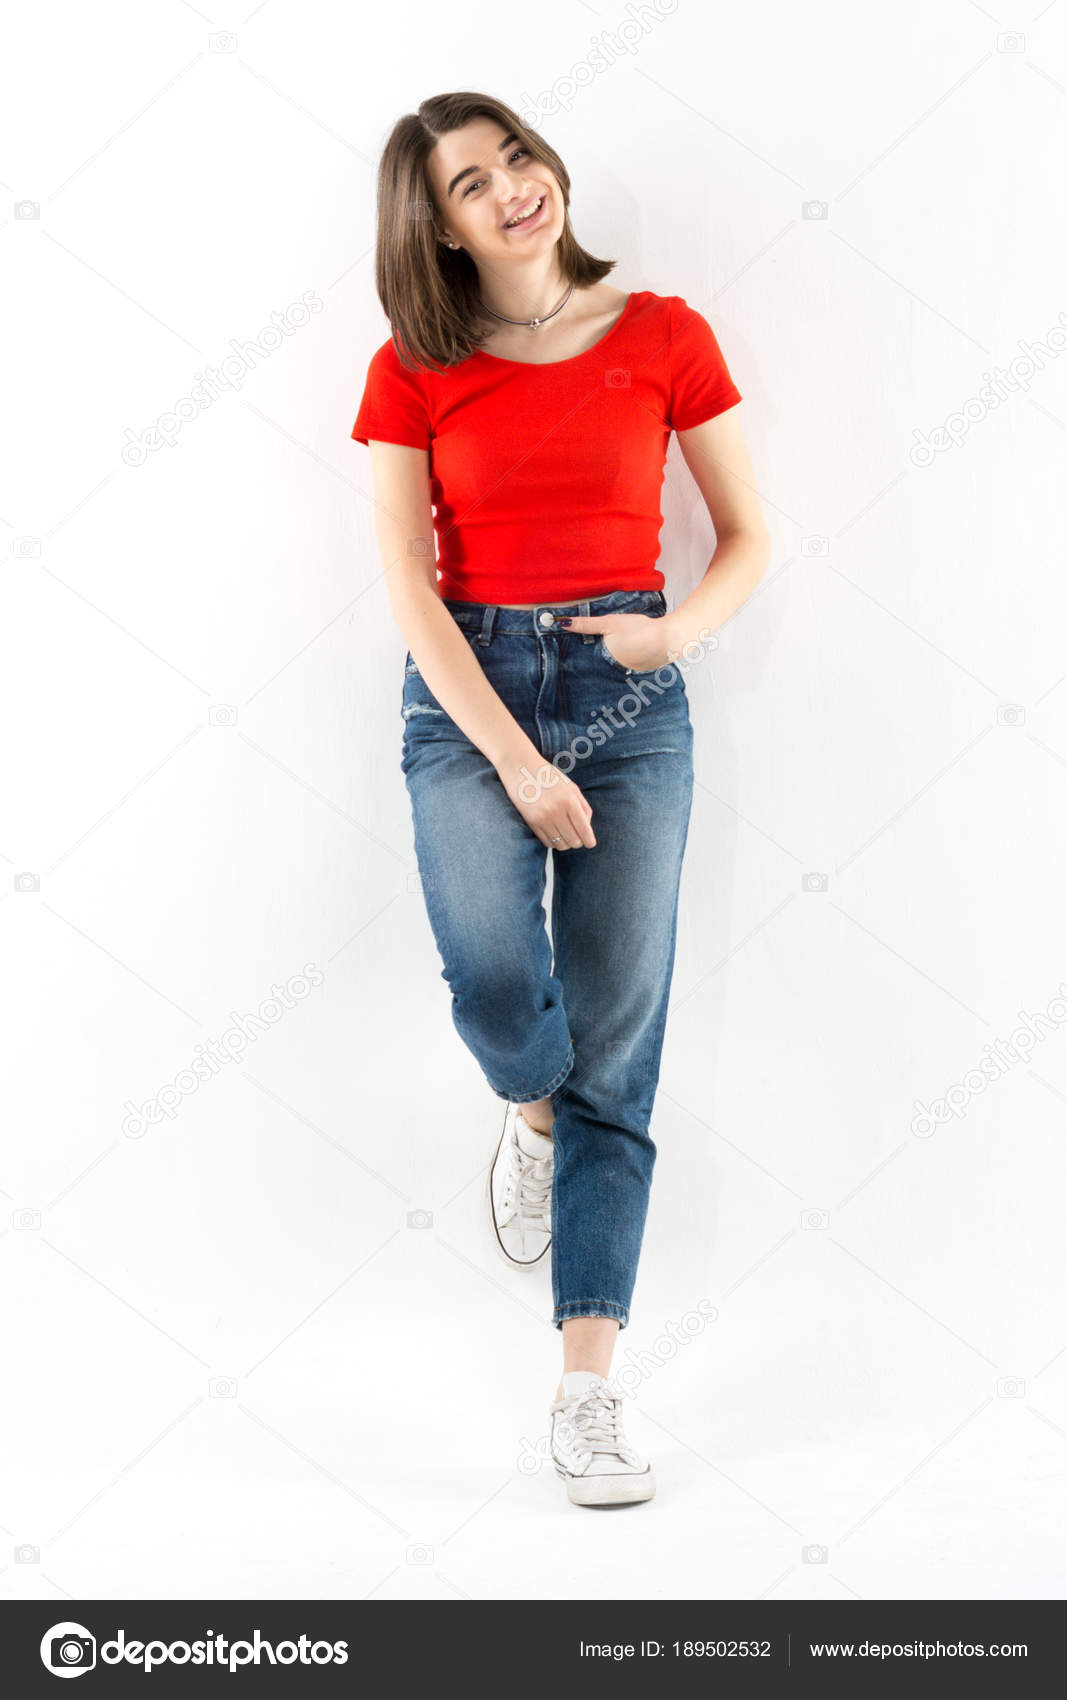 red shirt and jeans